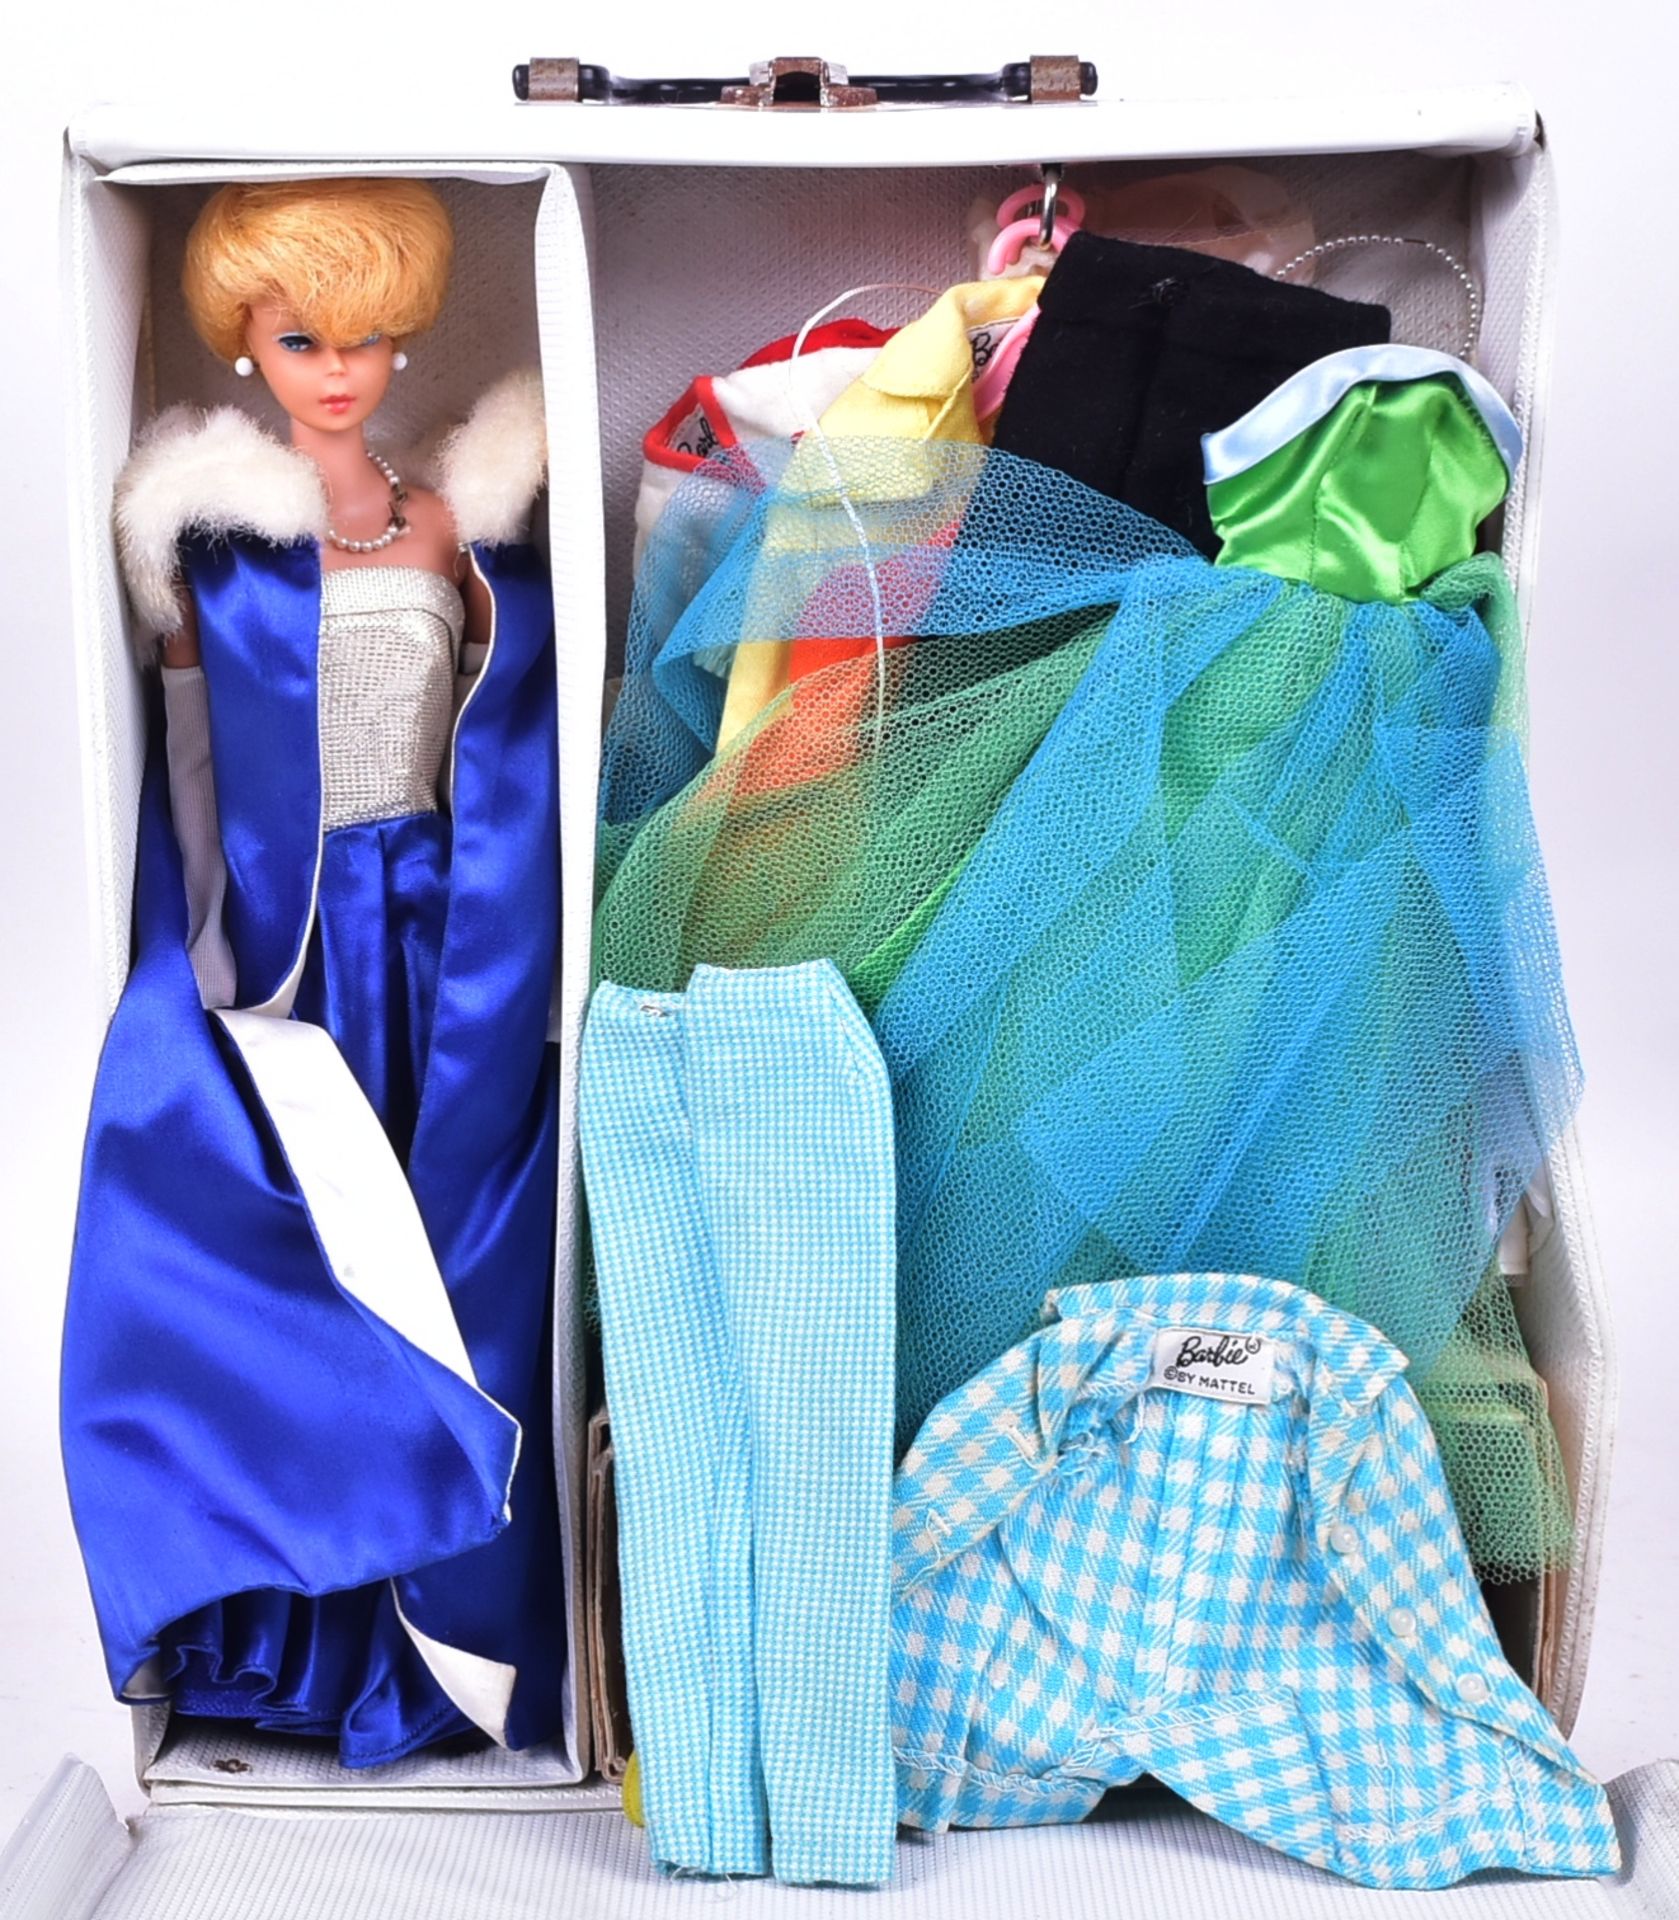 BARBIE - VINTAGE 1960S BARBIE DOLL WITH CLOTHING & ACCESSORIES - Image 2 of 6